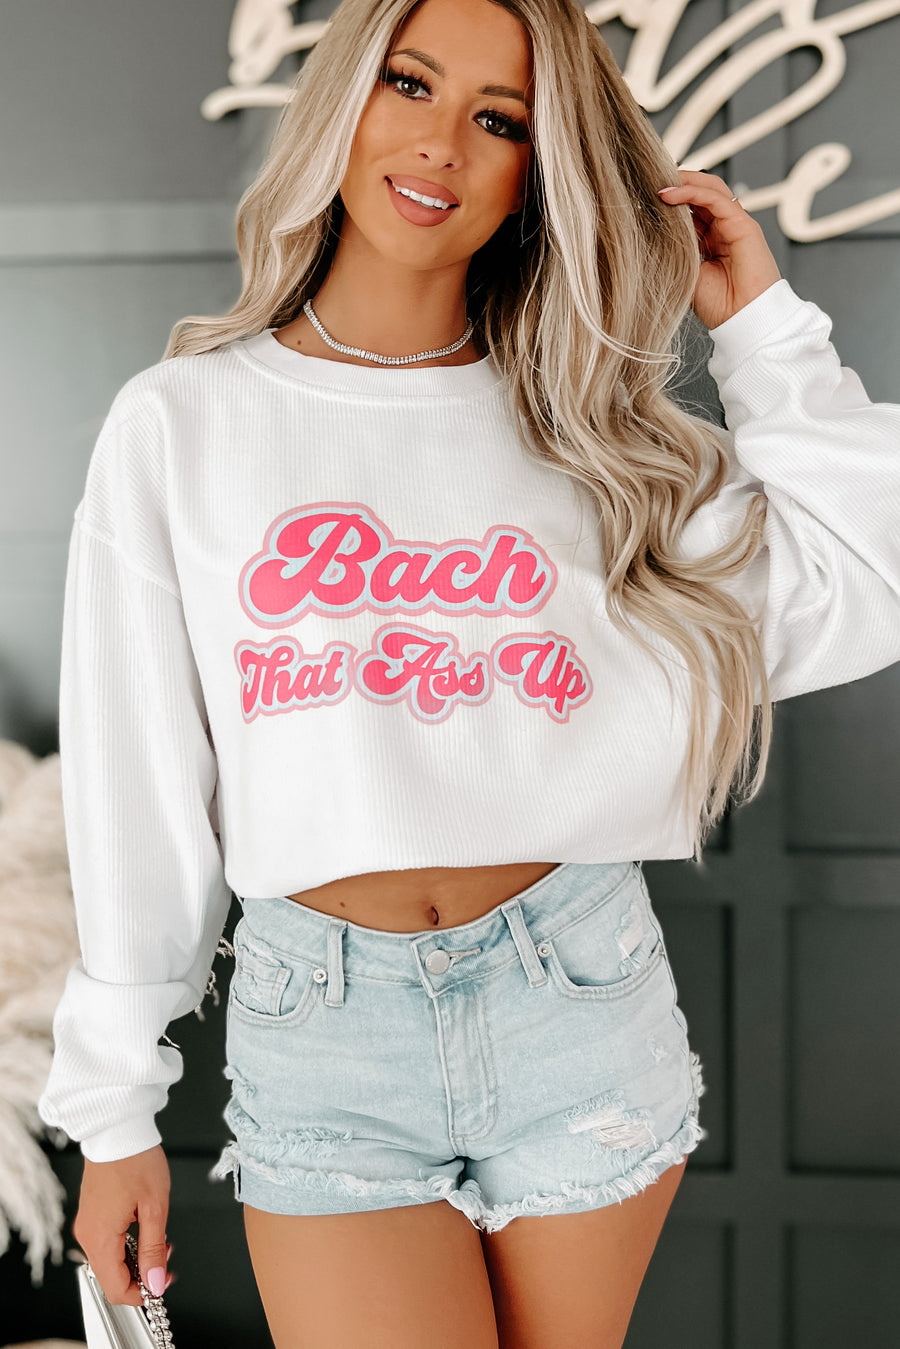 "Bach That Ass Up" Corded Graphic Crewneck (White/Pink) - Print On Demand - NanaMacs